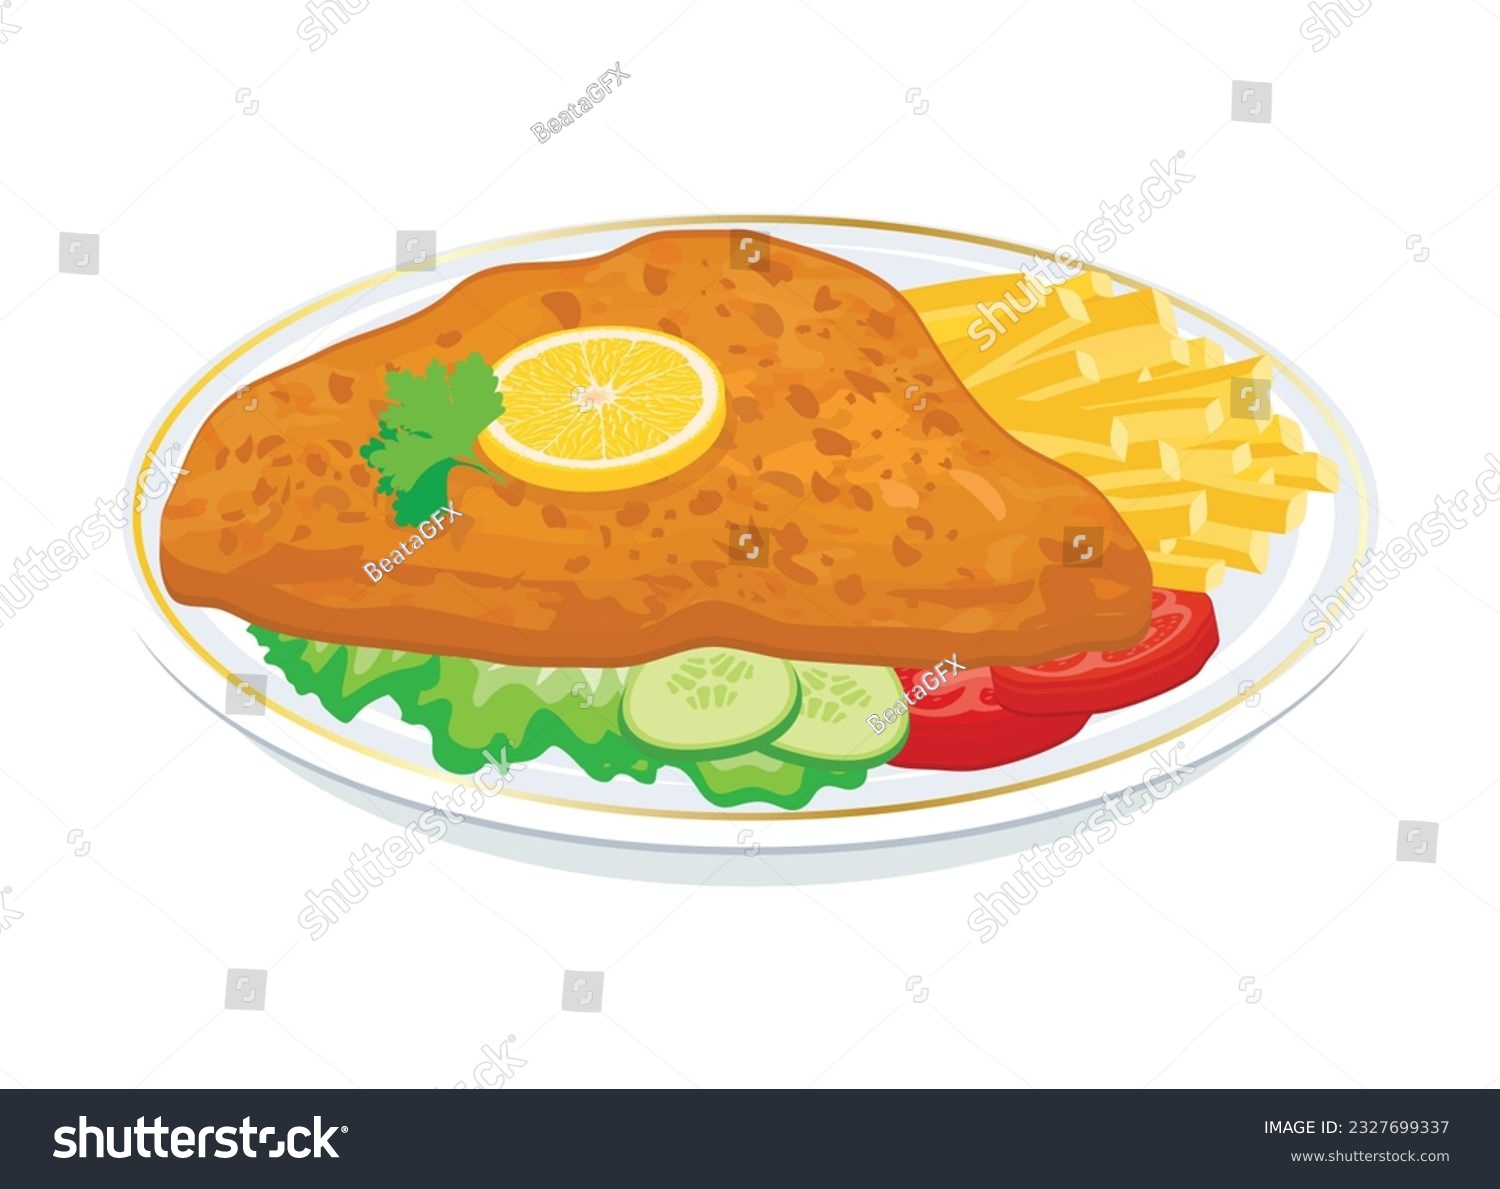 SVG of Fried pork schnitzel with french fries vector illustration. Fried steak with fries and vegetable garnish on a plate icon vector isolated on a white background. Chicken cutlet drawing svg